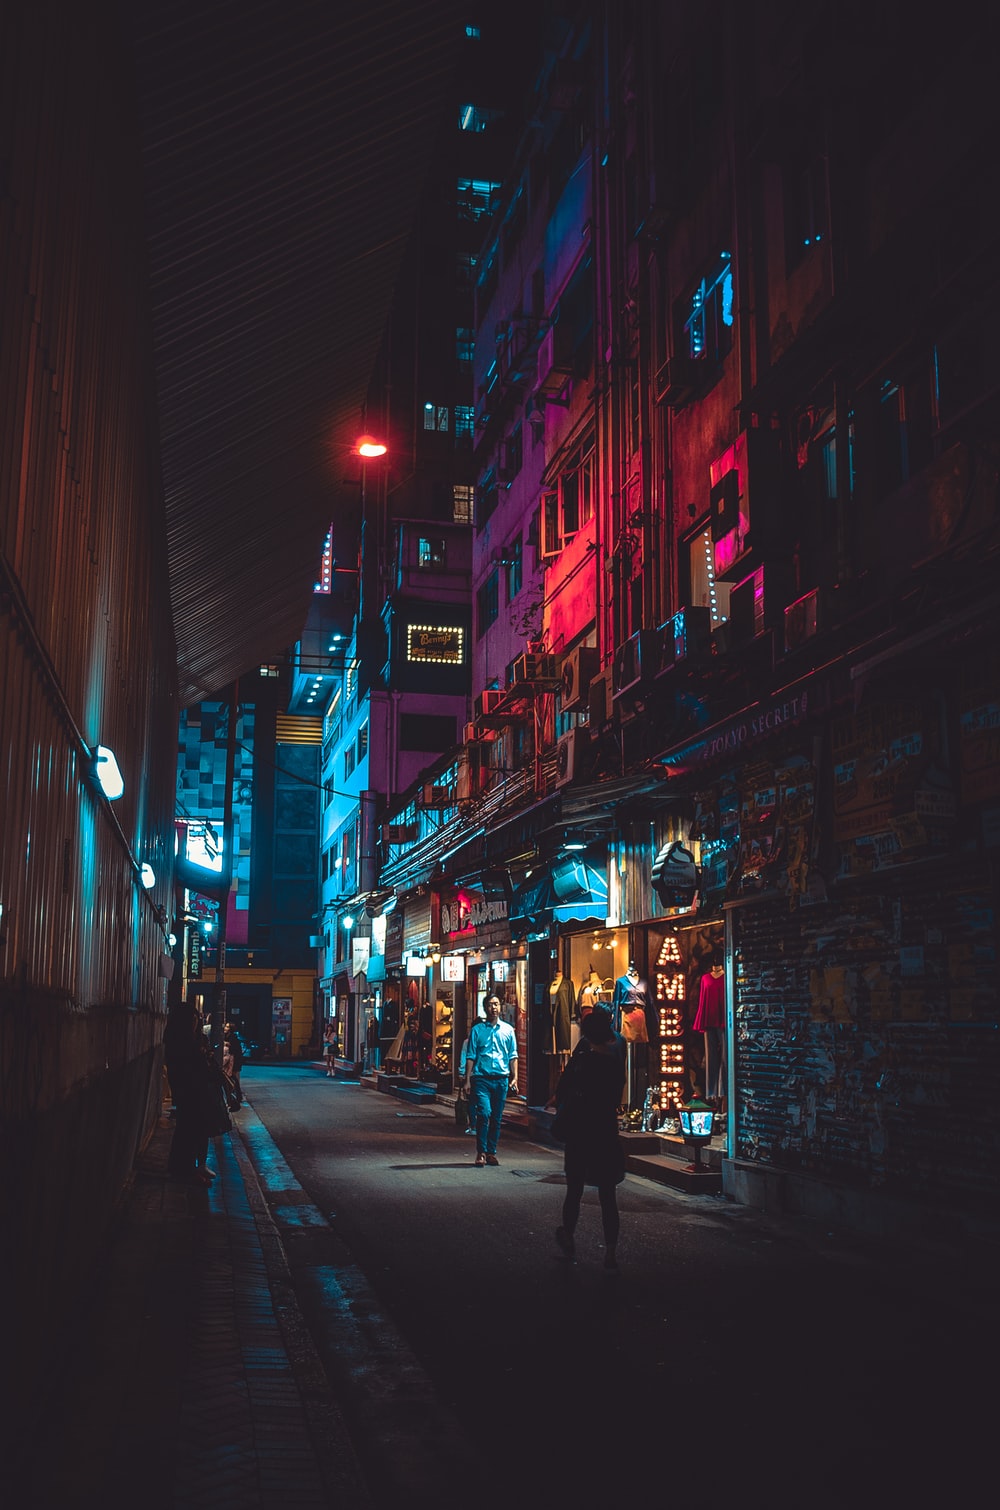 Night Street Photography Picture. Download Free Image